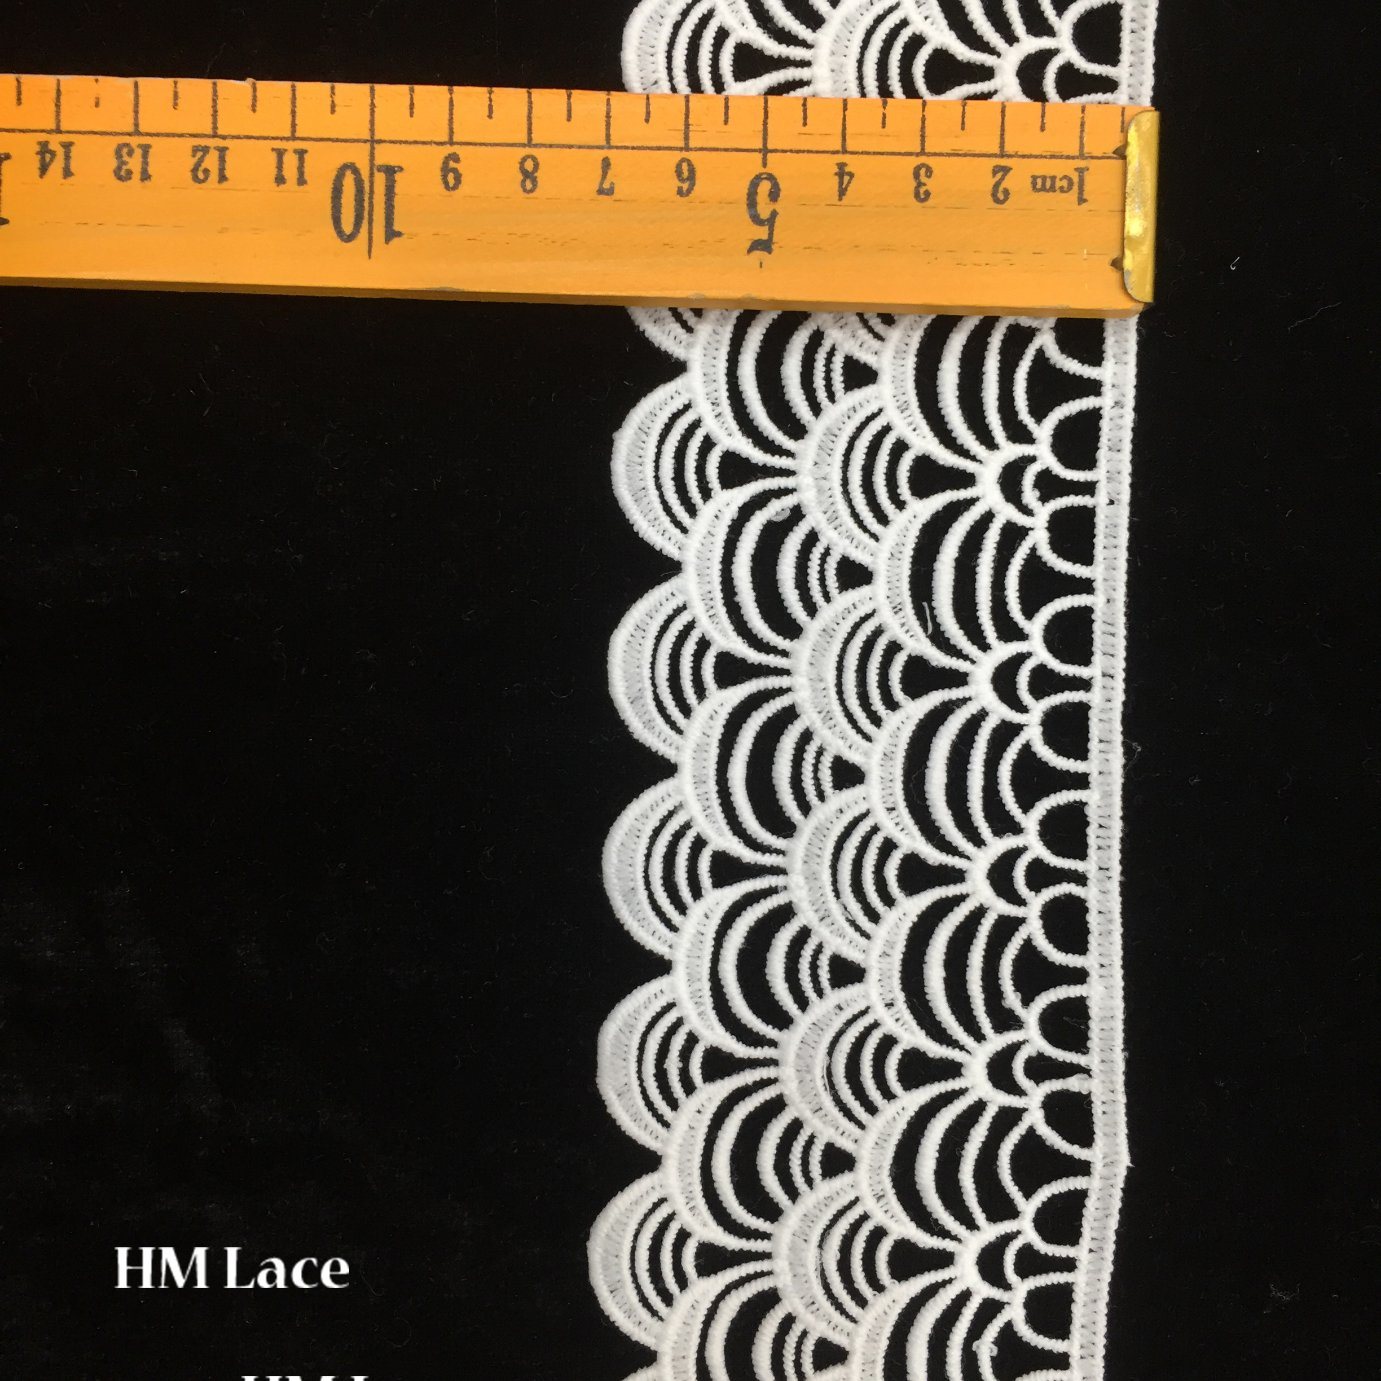 7cm Crocheted Lace Trim DIY Craft Ribbon, Scallop Edge Thick Quality Customized Trimming Lace Hmhb1115